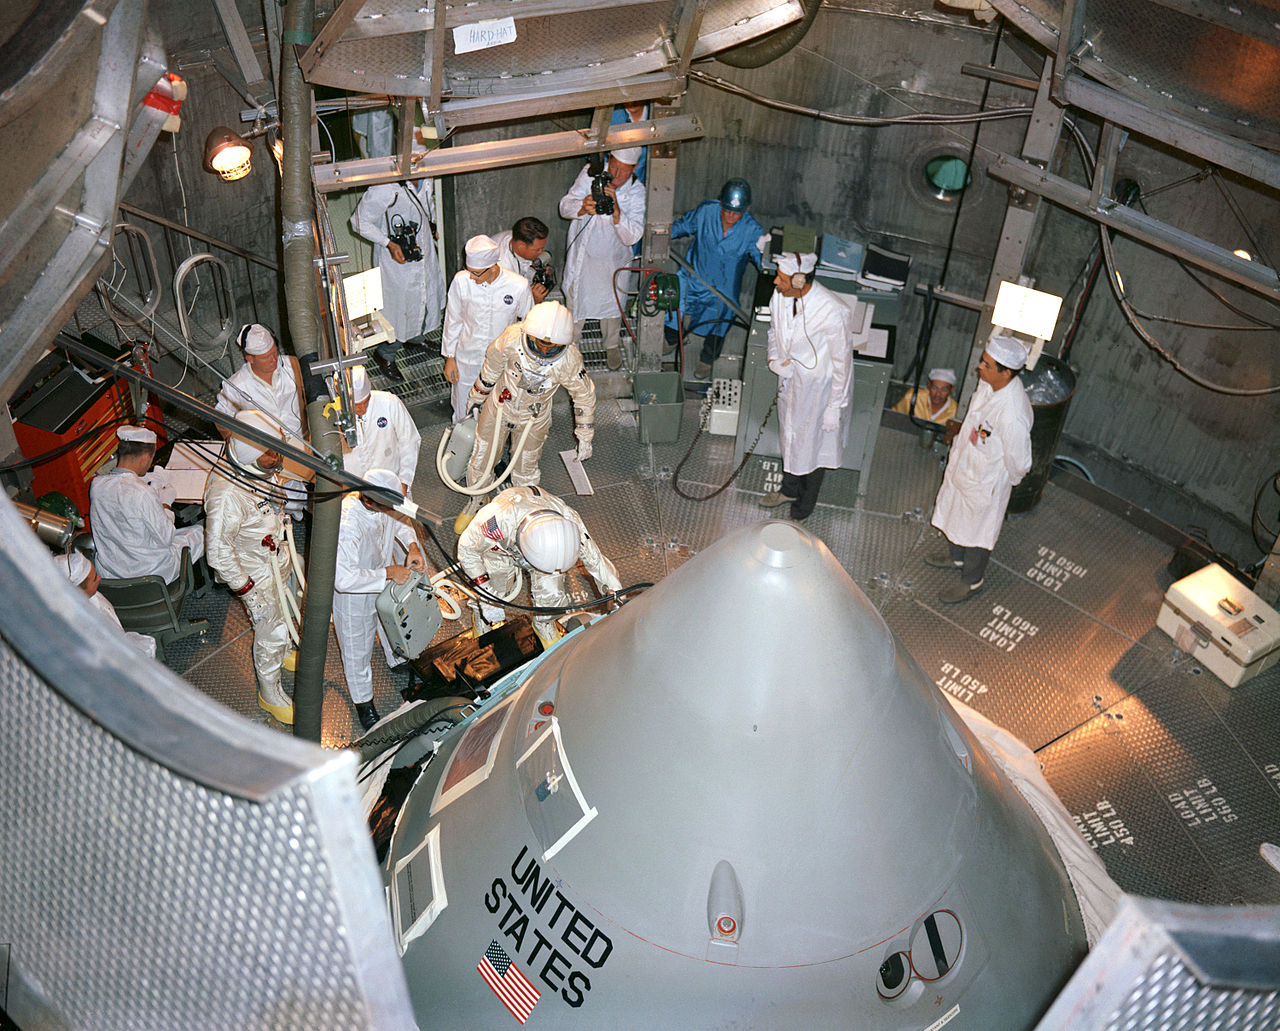 1280px-Apollo_1_crew_prepare_to_enter_their_spacecraft_in_the_altitude_chamber_at_Kennedy_Spac...jpg